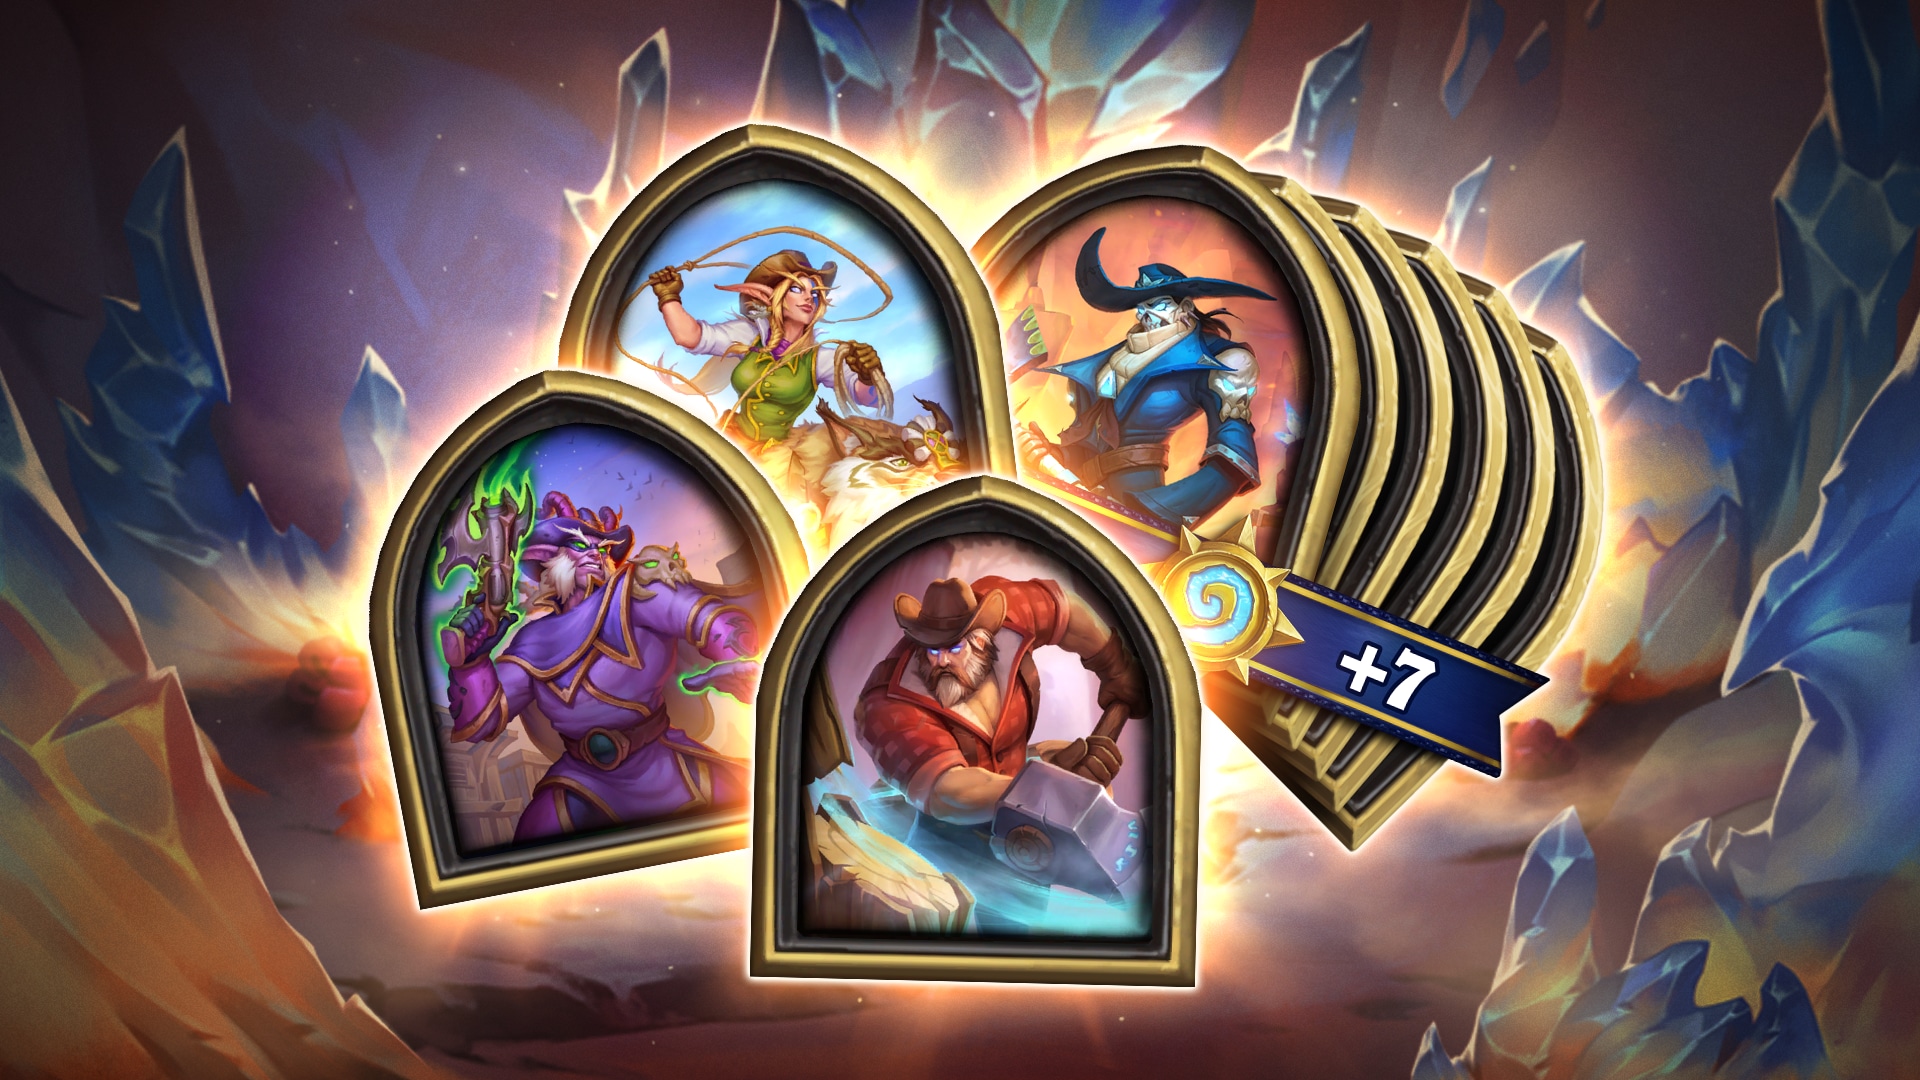 All Showdown in the Badlands Day 10 Hearthstone Card Reveals - October 28 -  Out of Games